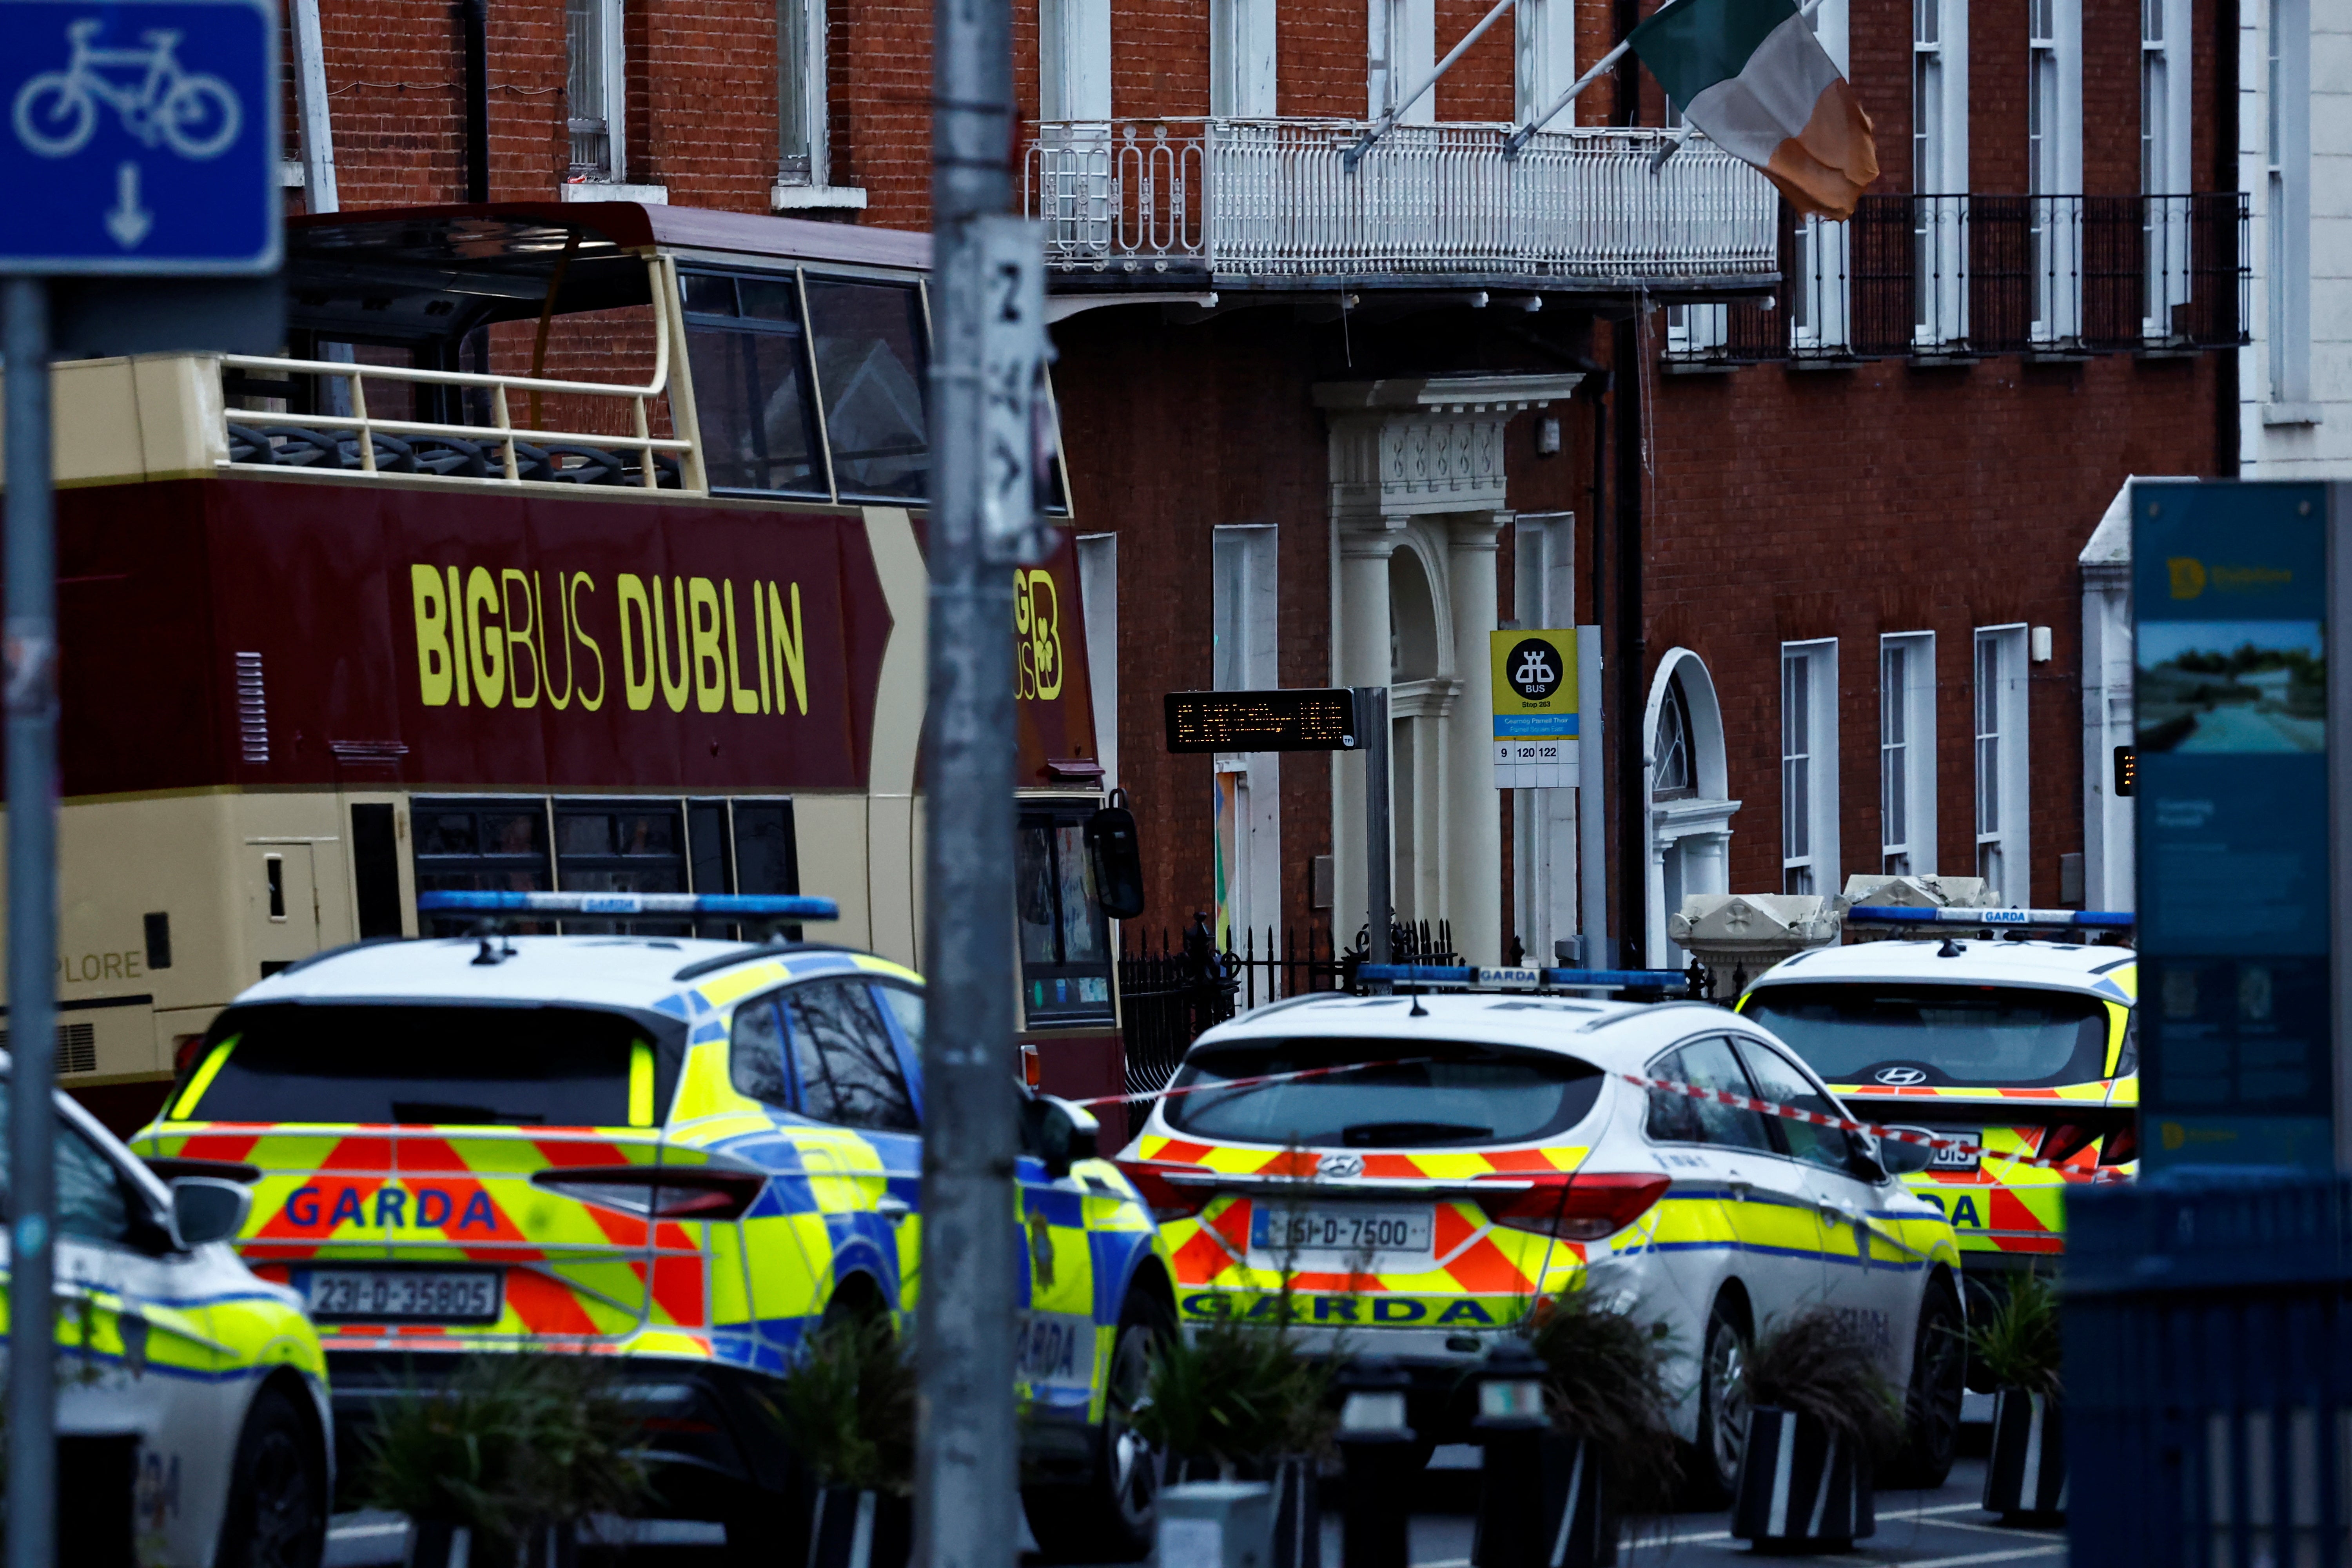 A woman told RTE that she saw a man attacking children before several people intervened